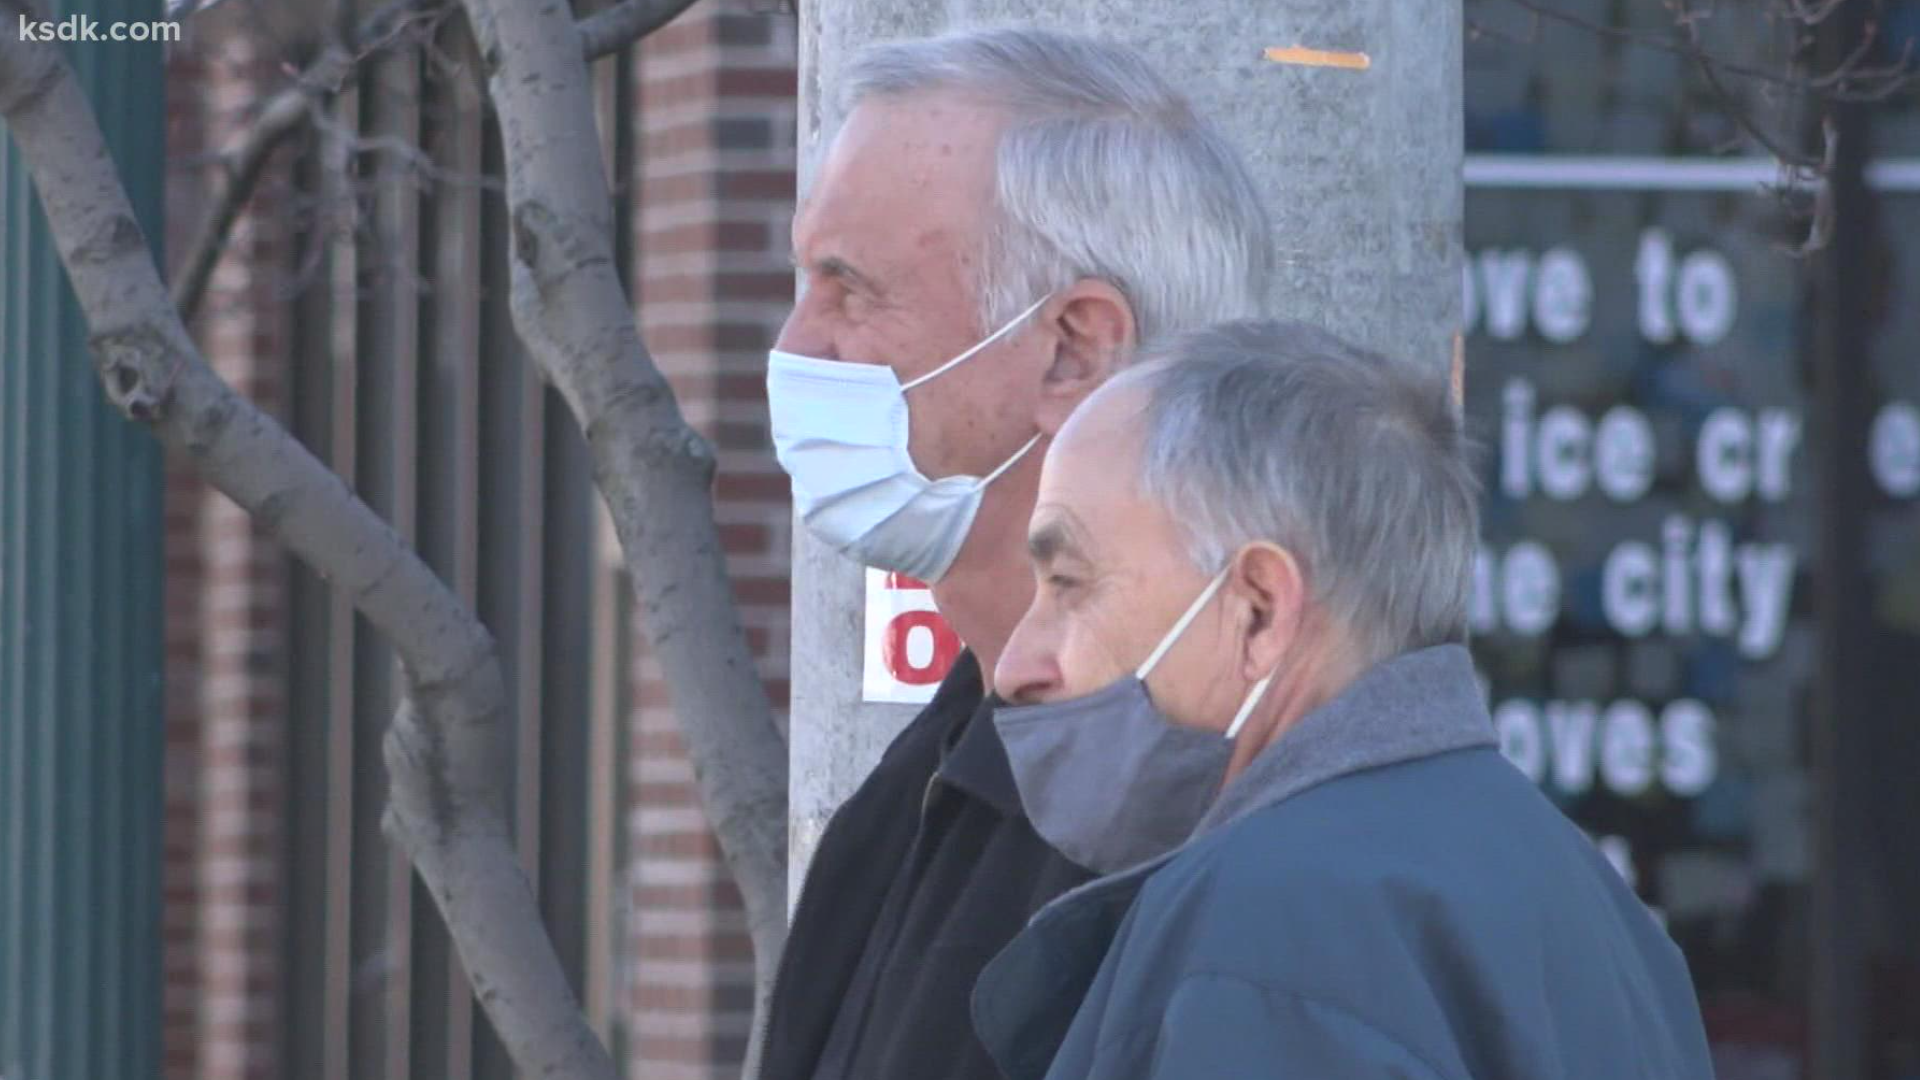 The county's department of public health will instead have an advisory that encourages masks.